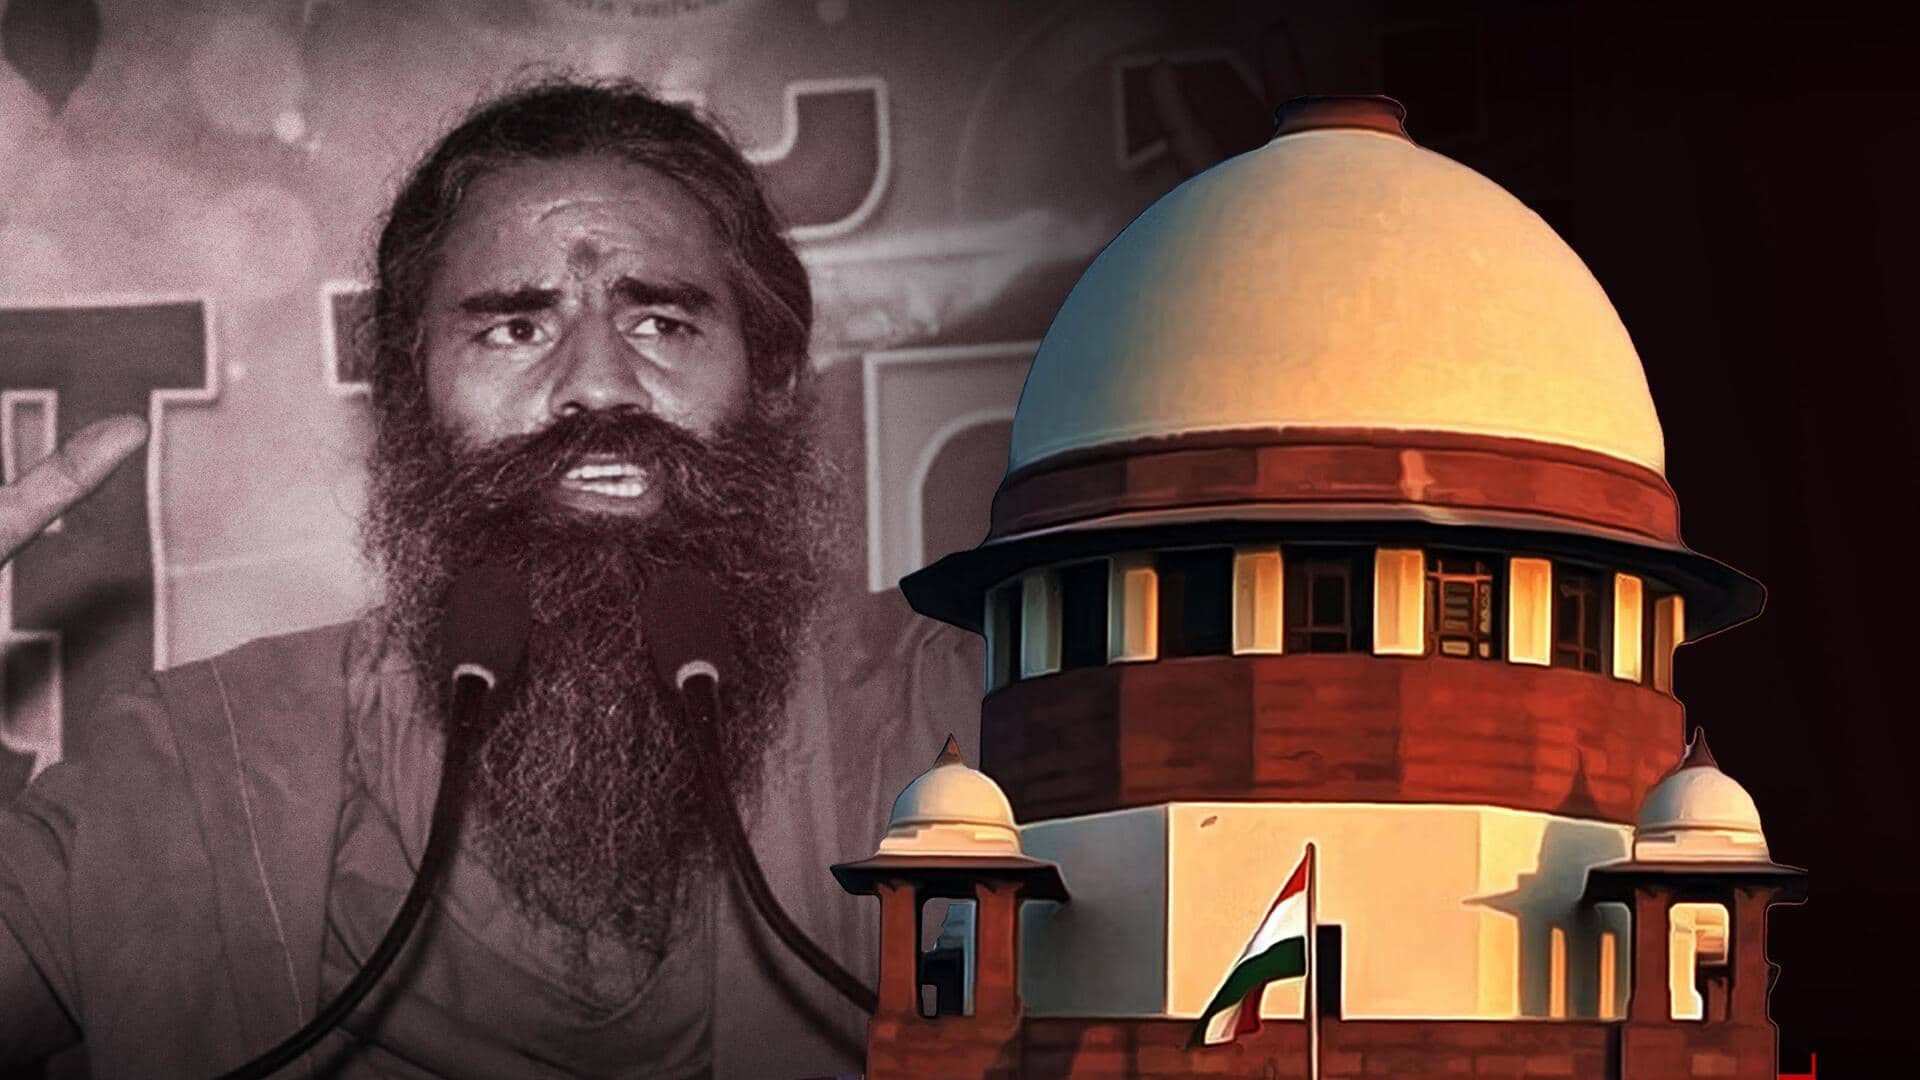 Patanjali misleading ads case: Ramdev may appear before SC today 